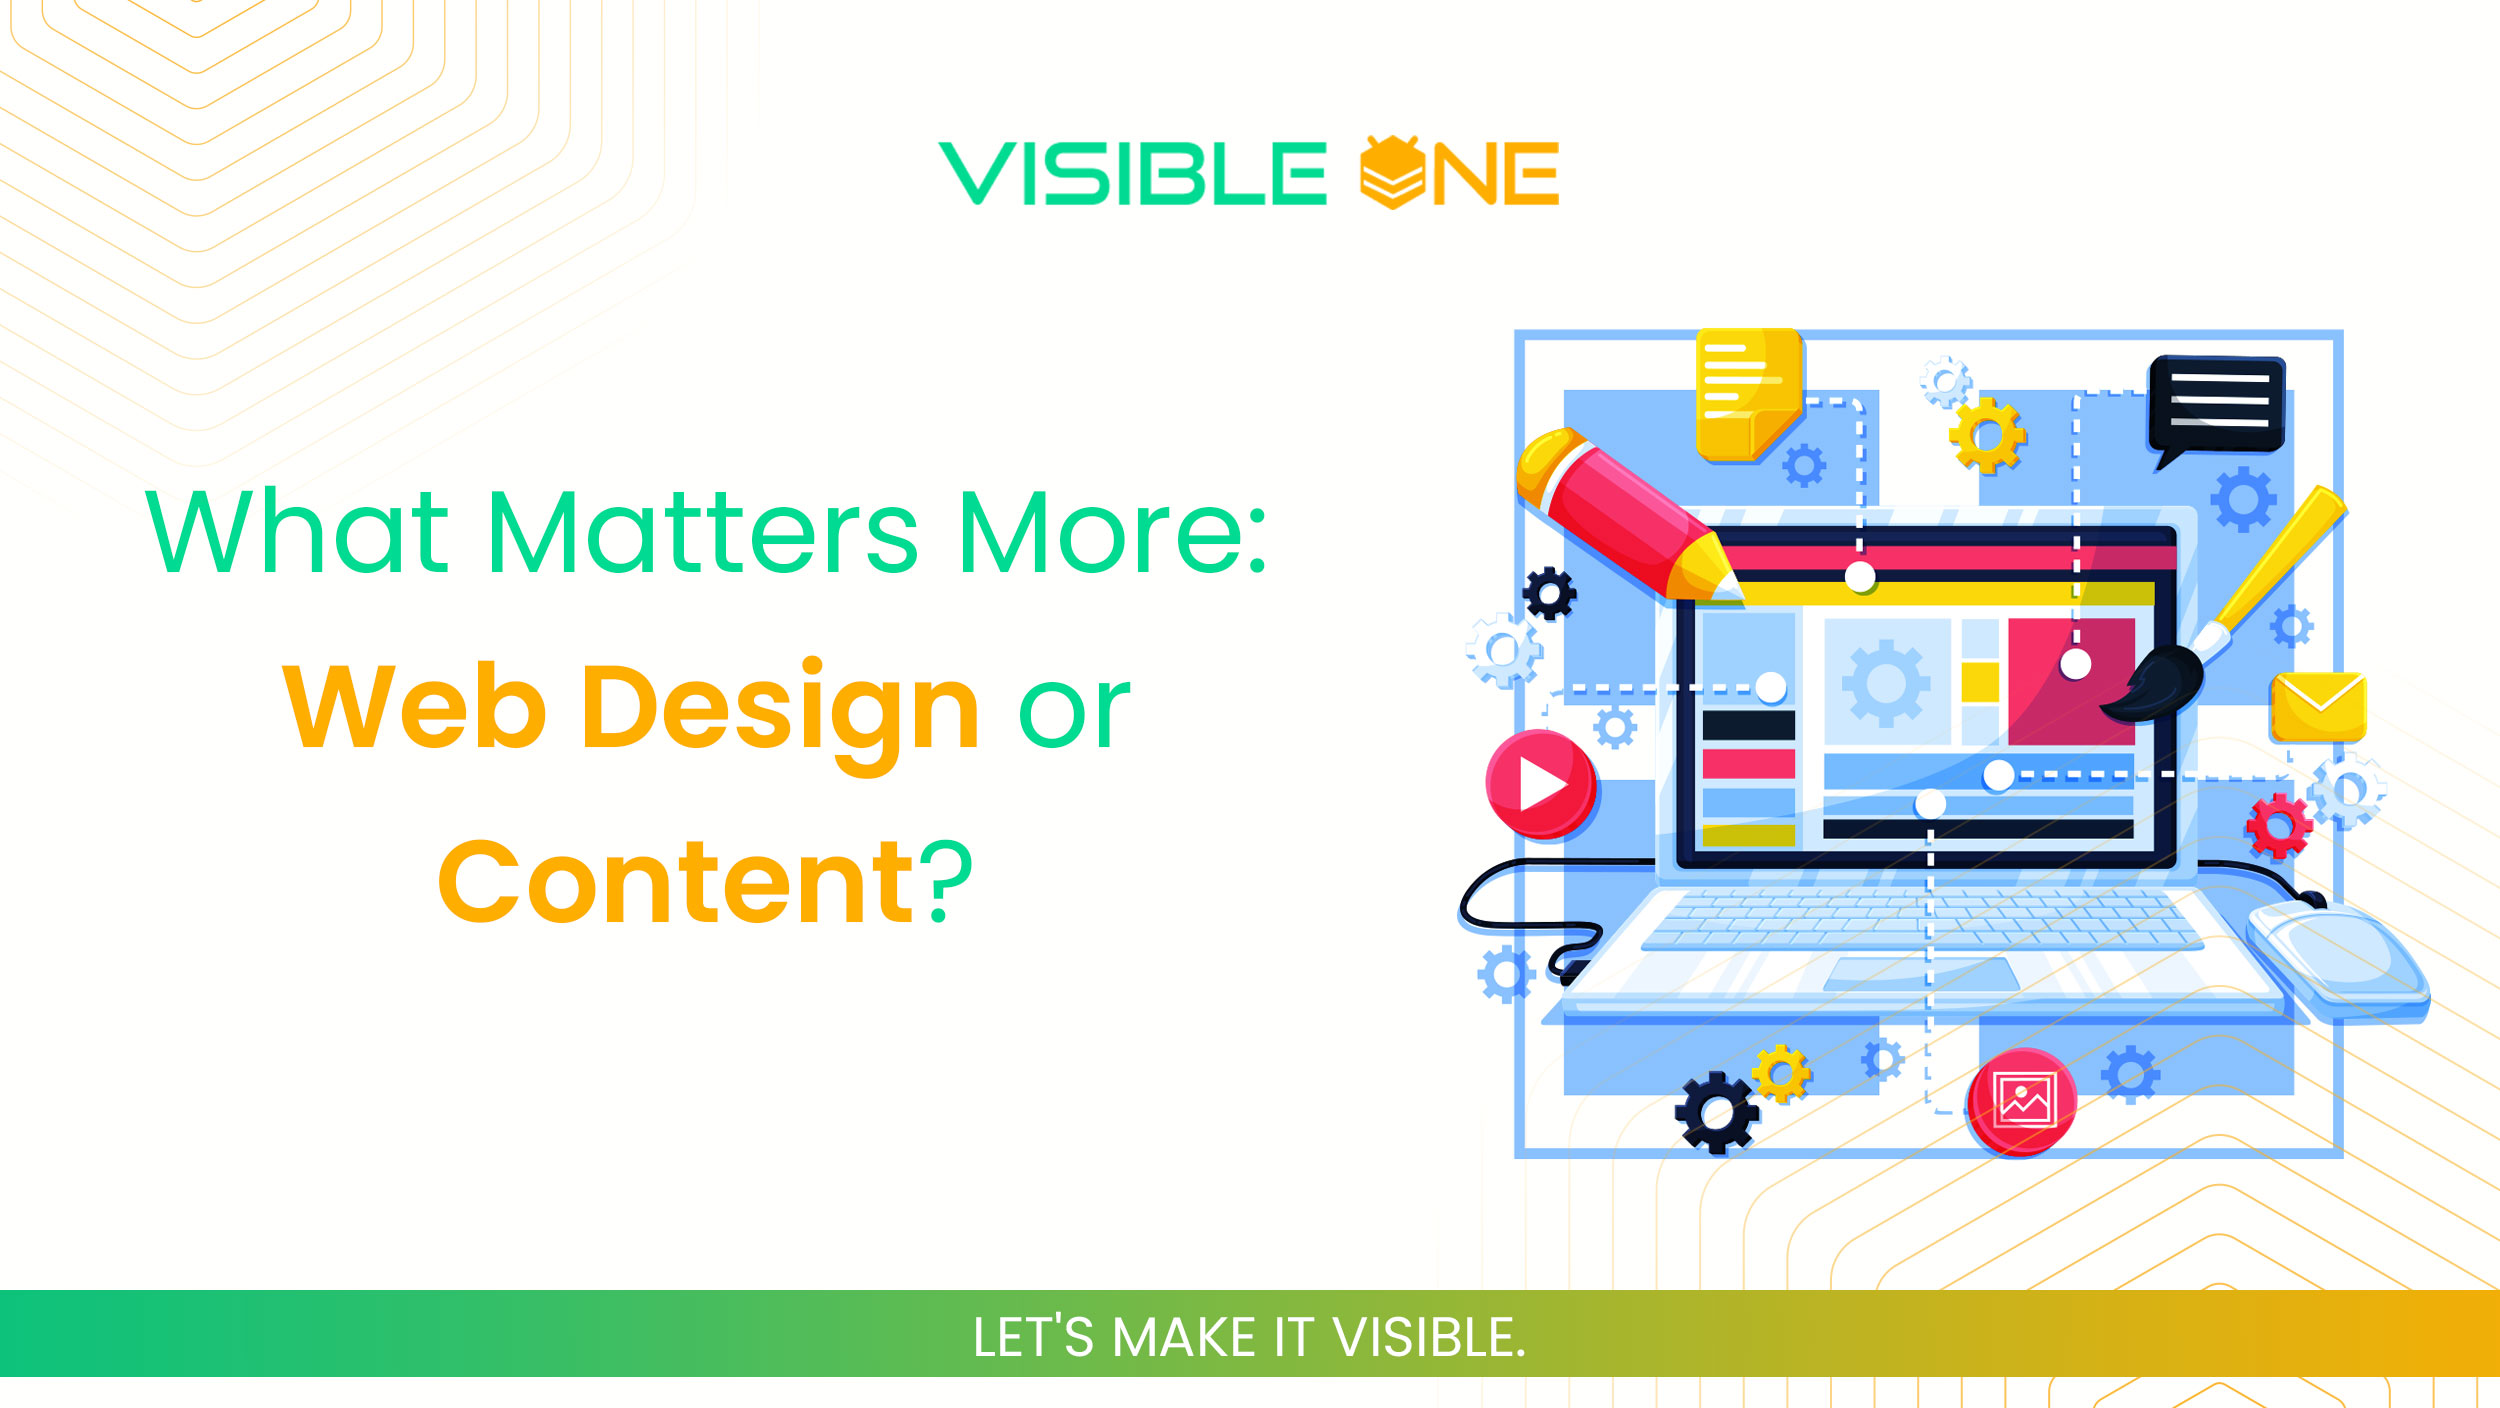 What Matters More: Web Design or Content?